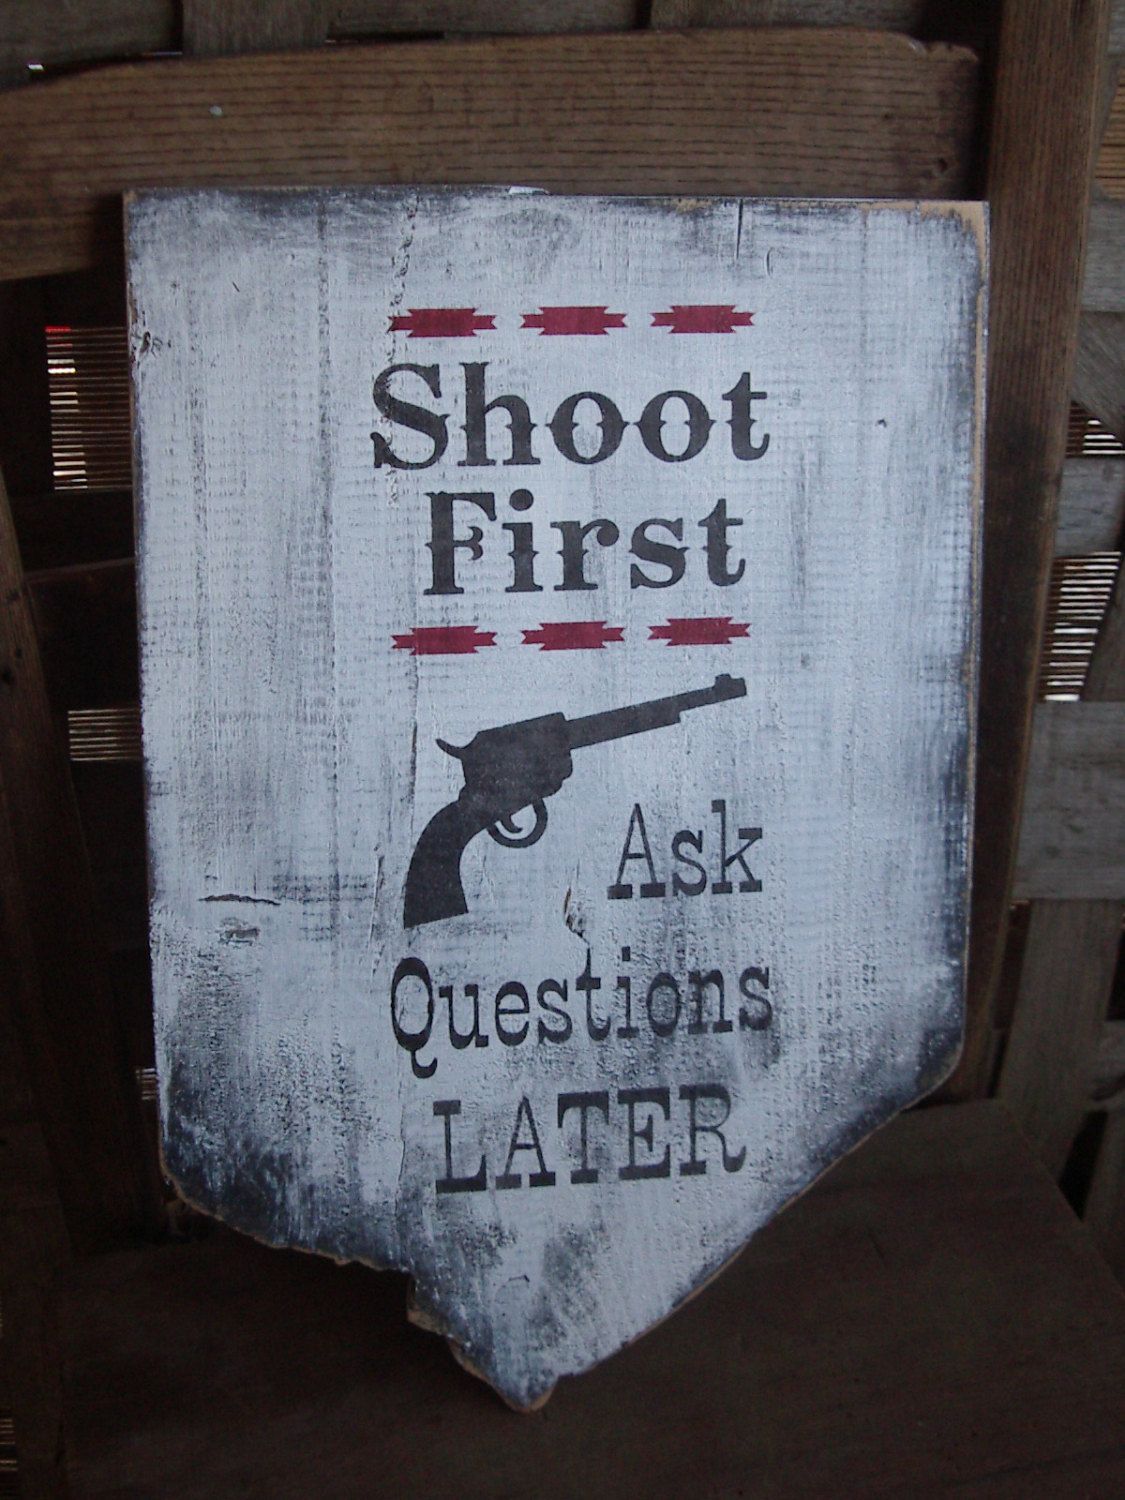 Rustic, “Shoot First” …ask questions later, hand painted barn wood sign. Cowbo